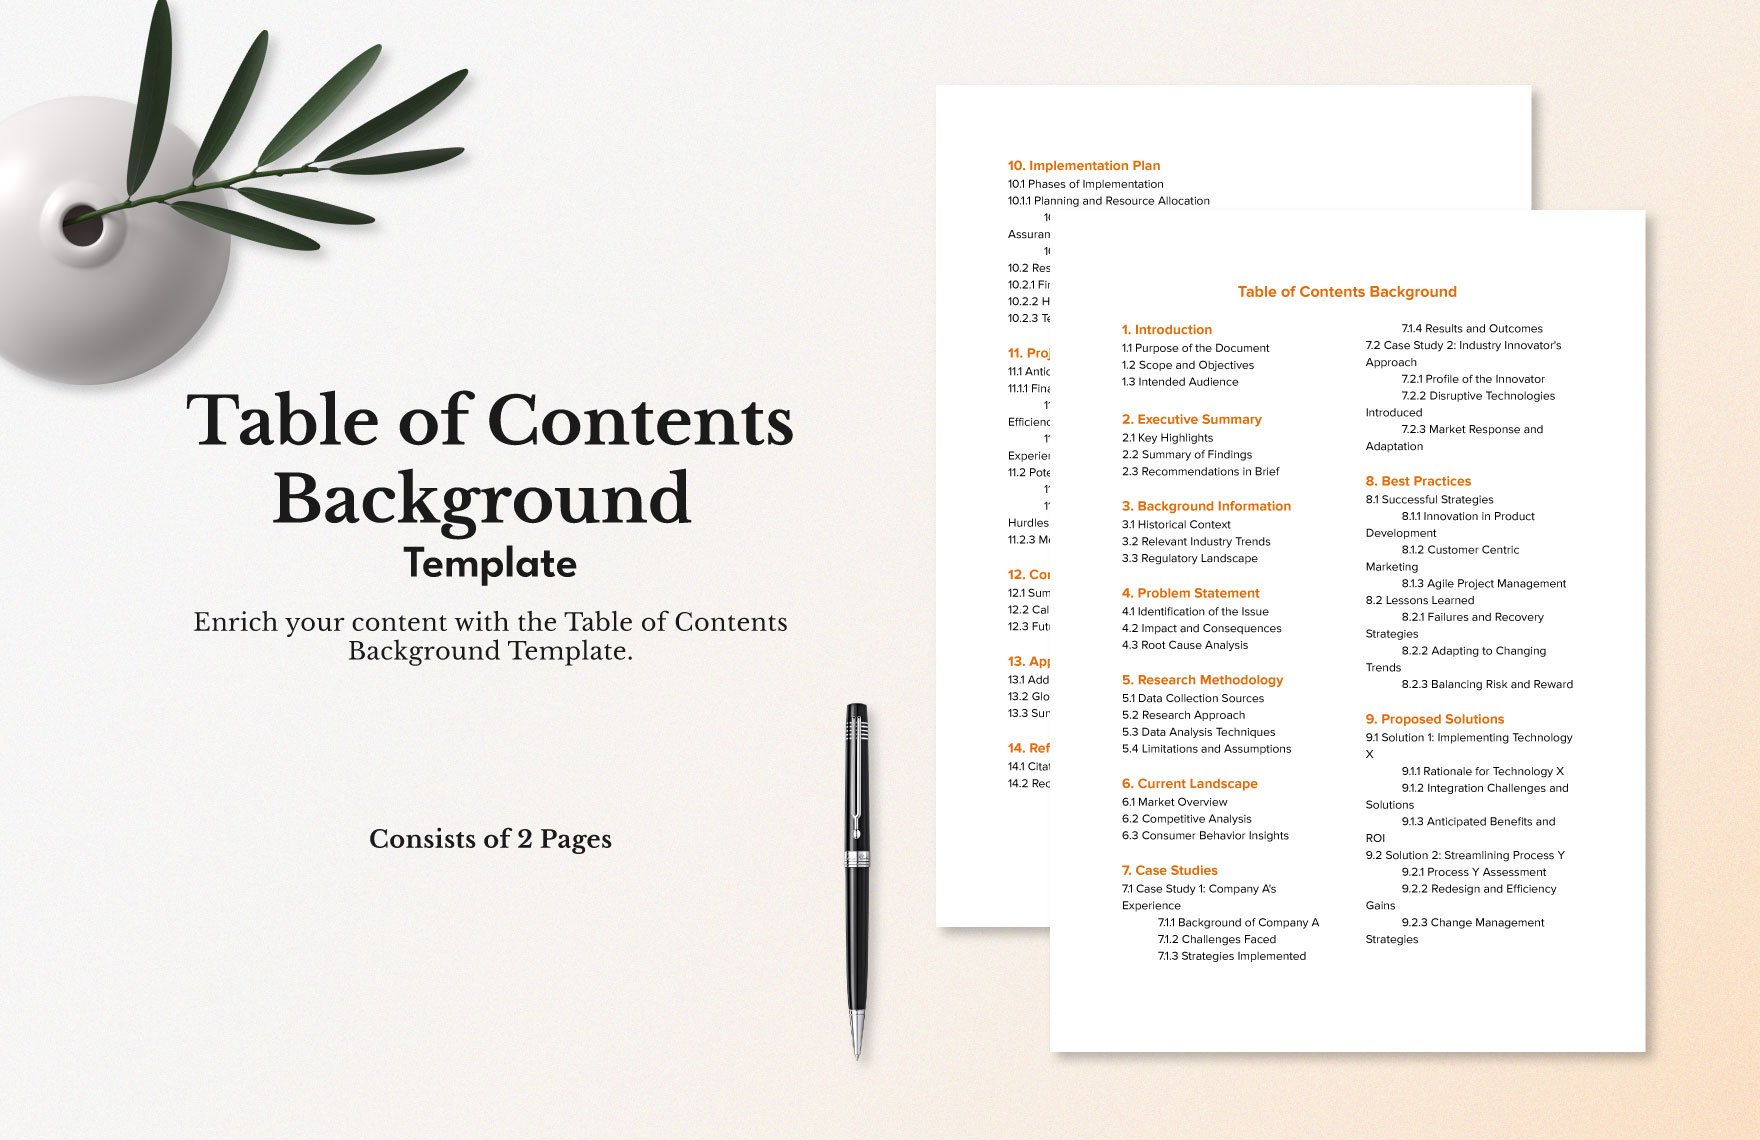 Table of Contents Background Template